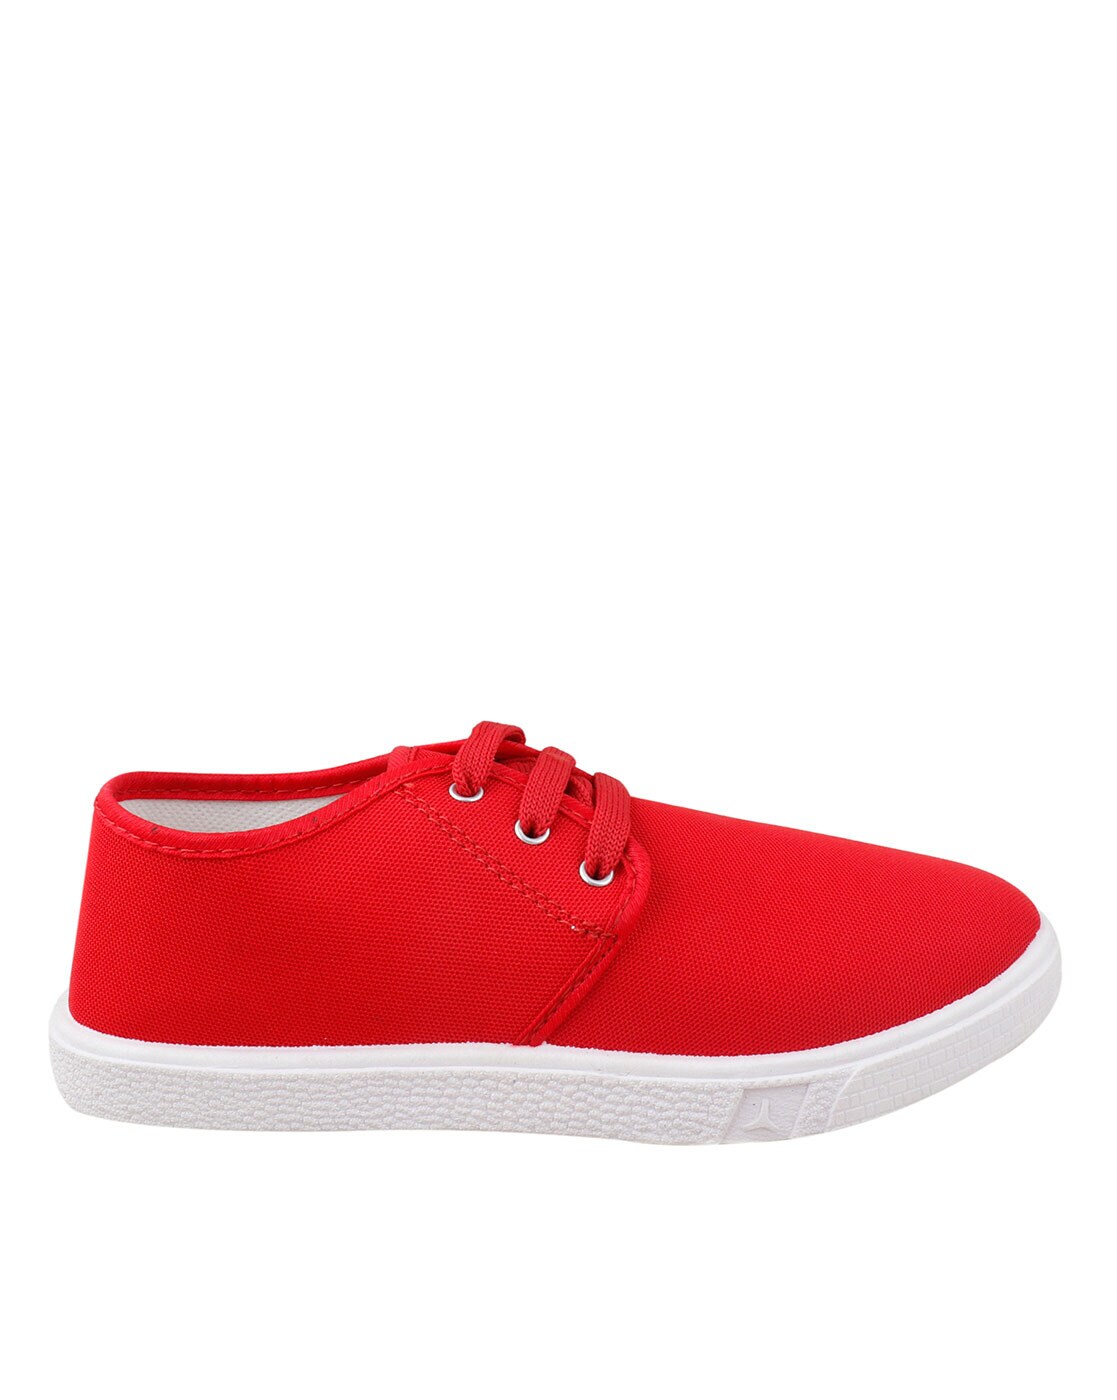 Buy Red Casual Shoes for Men by FS FOOT STAIR Online | Ajio.com